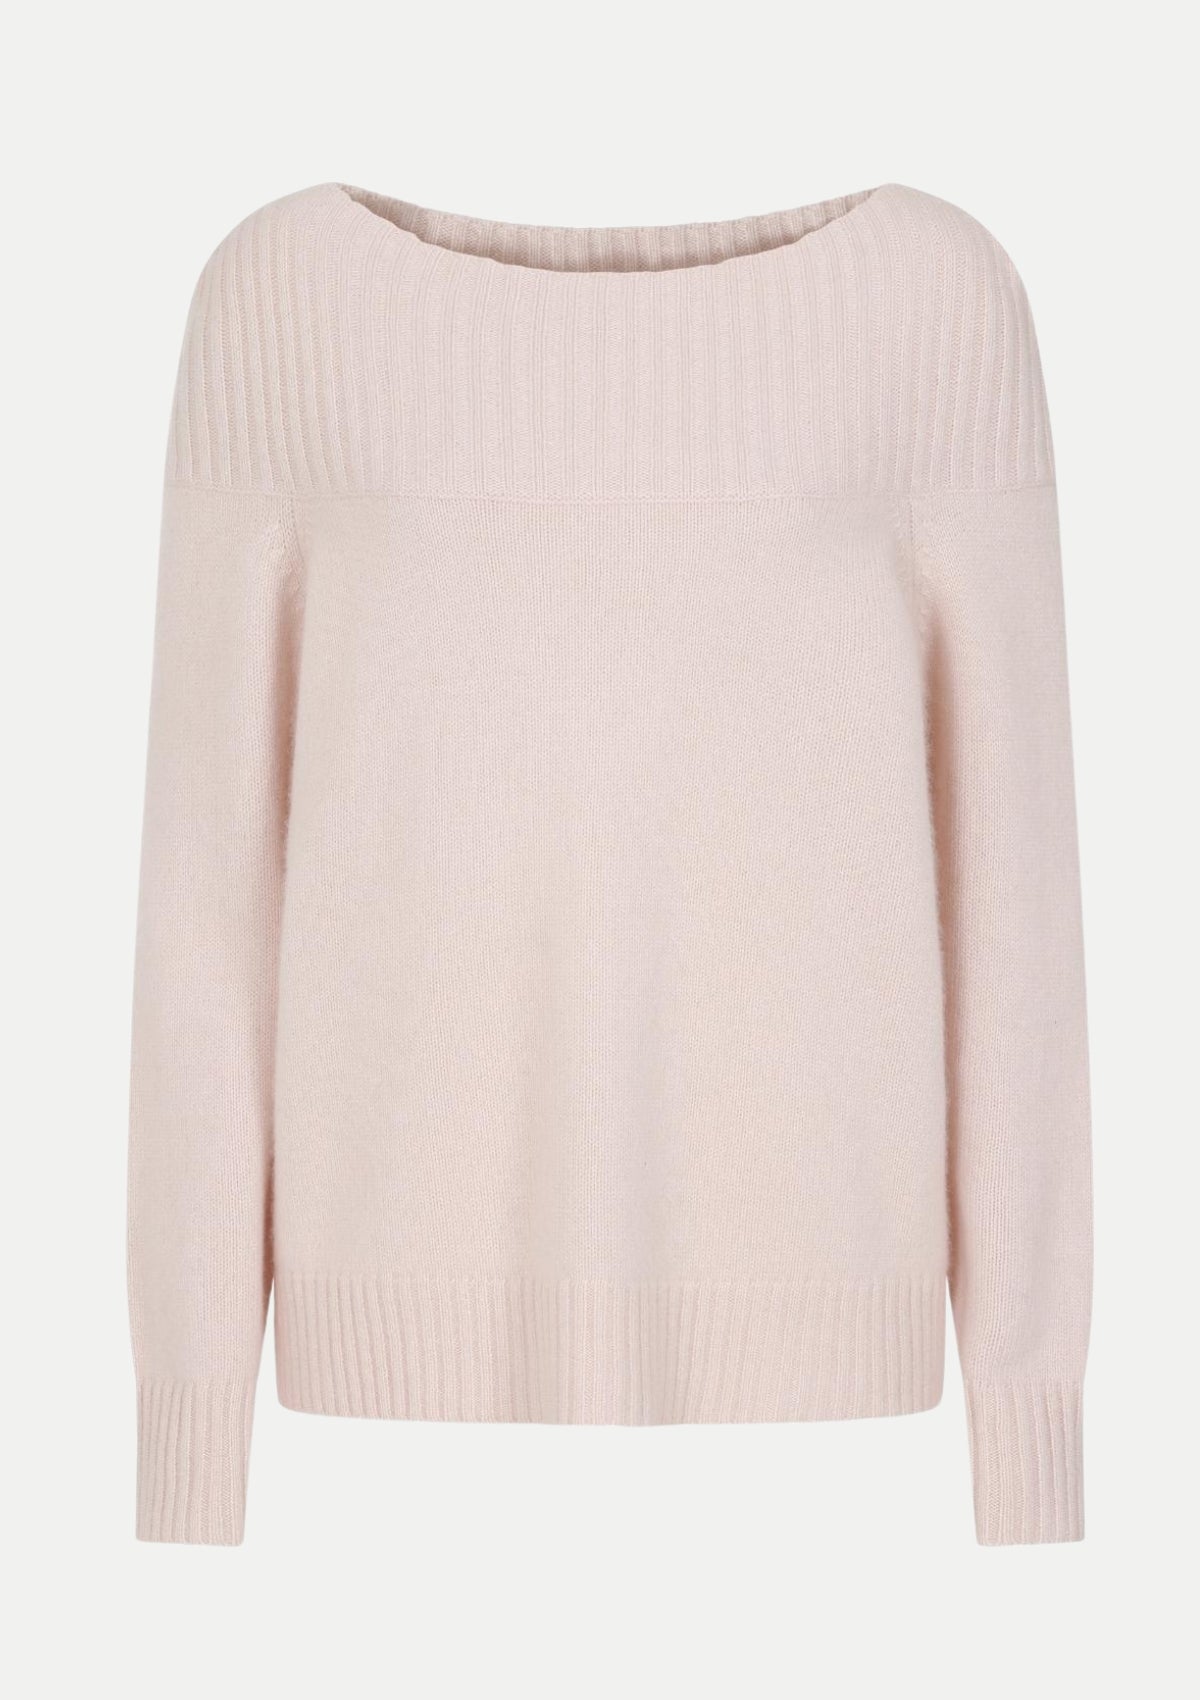 Cashmere Boat Neck Sweater in Ballet Pink